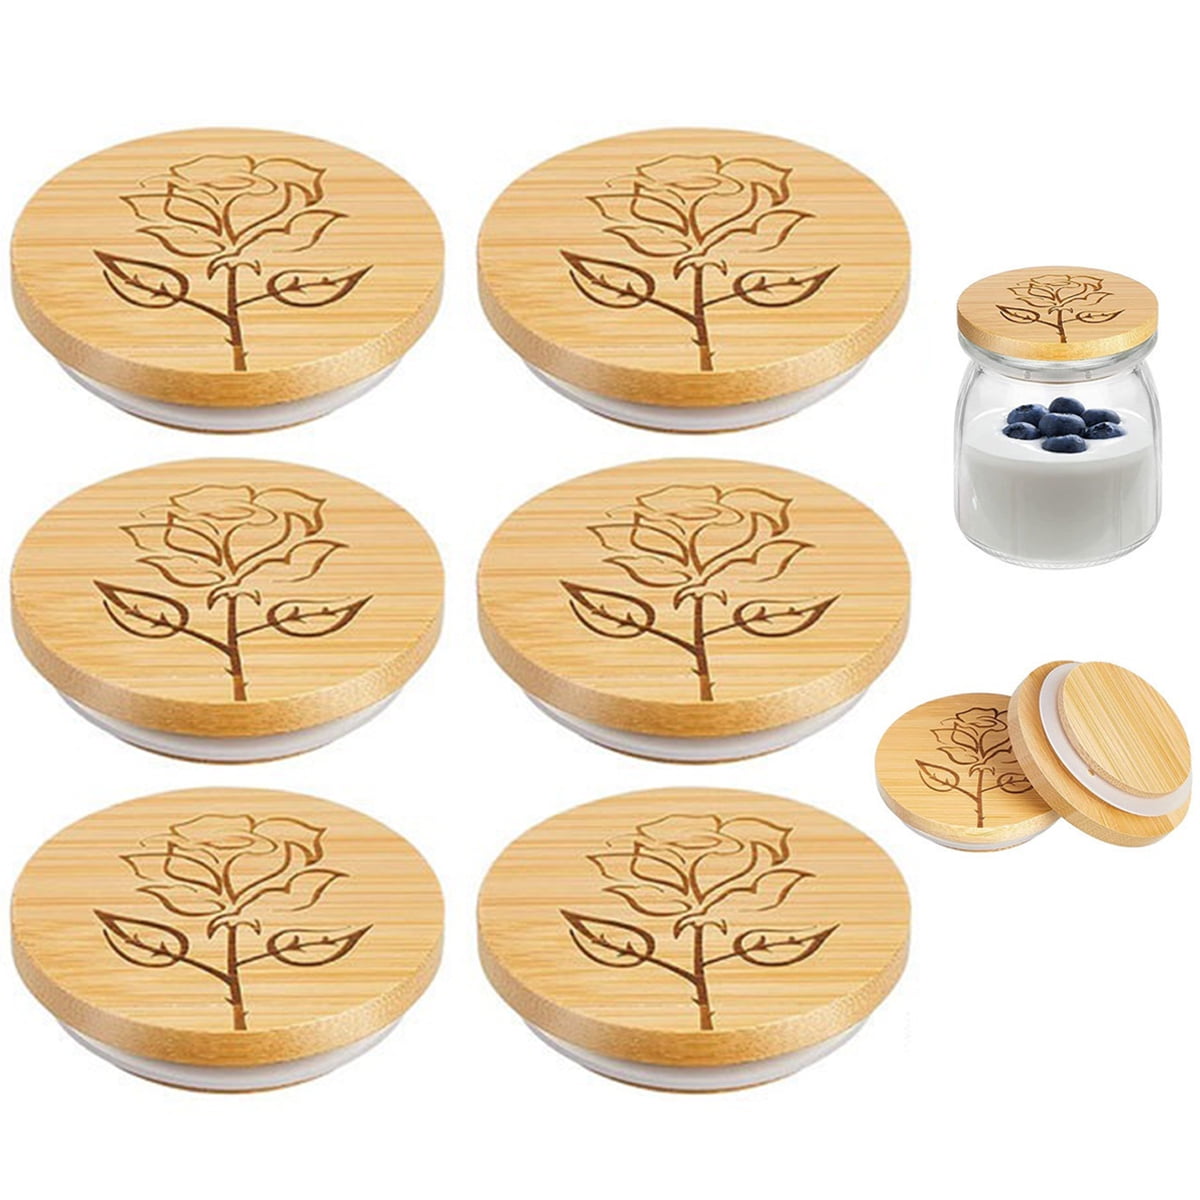 Oui Yogurt Jar Lids 12 Pack, Bamboo Lids that Fit Oui Yogurt Jars, Oui Lids  with Silicone Sealing Rings and Leaves Pattern for Perfect Sealing, Re-Use